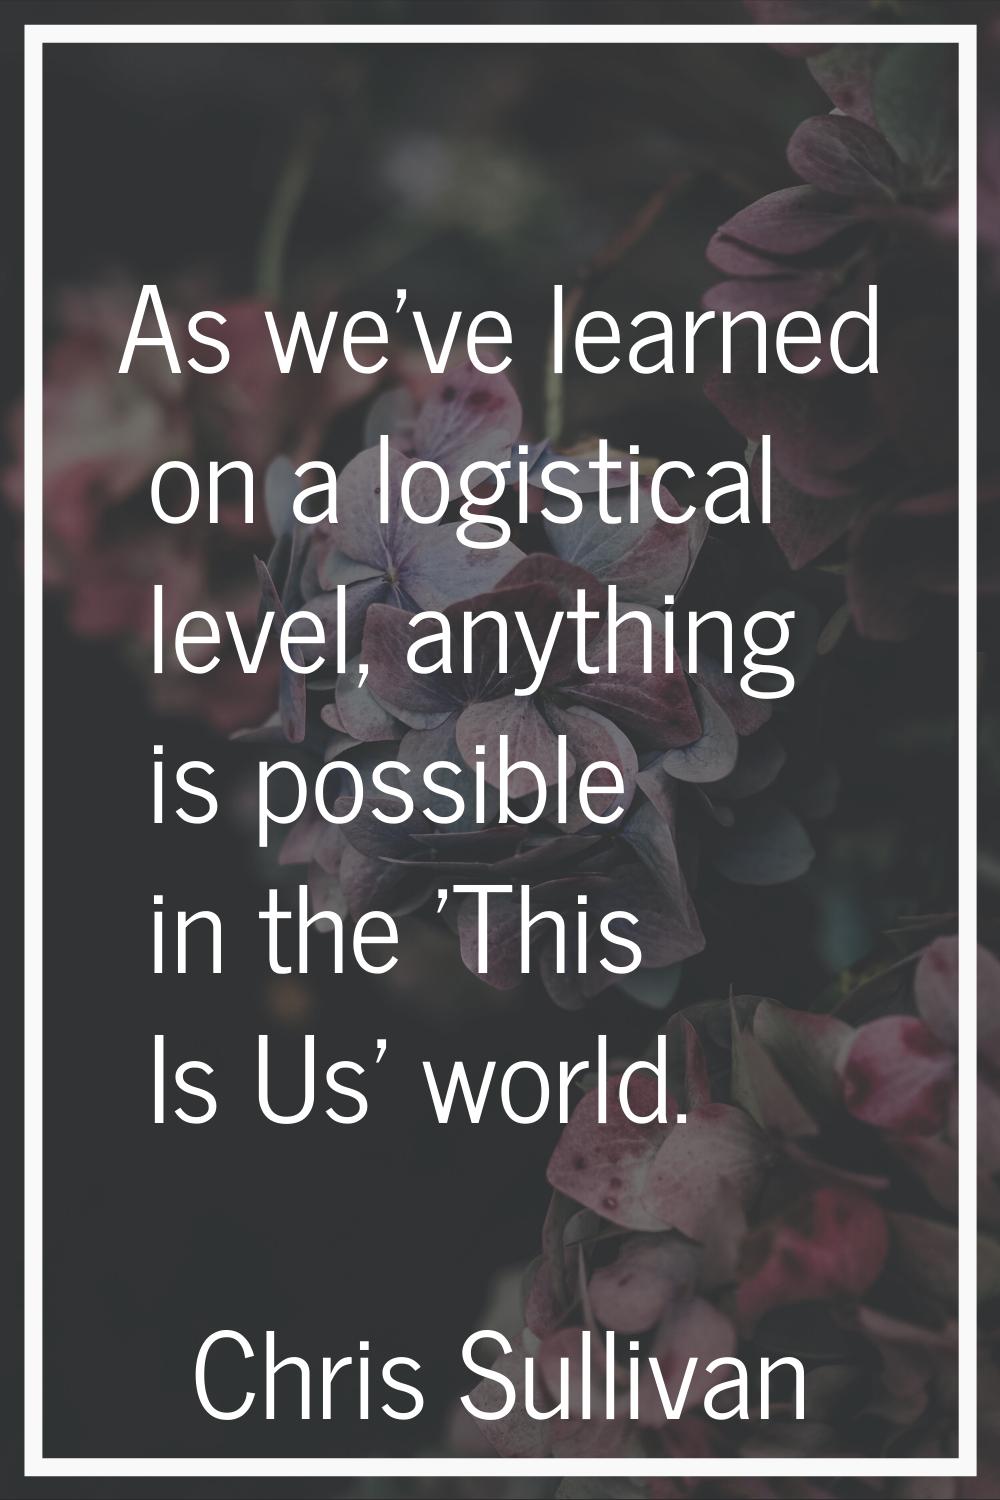 As we've learned on a logistical level, anything is possible in the 'This Is Us' world.